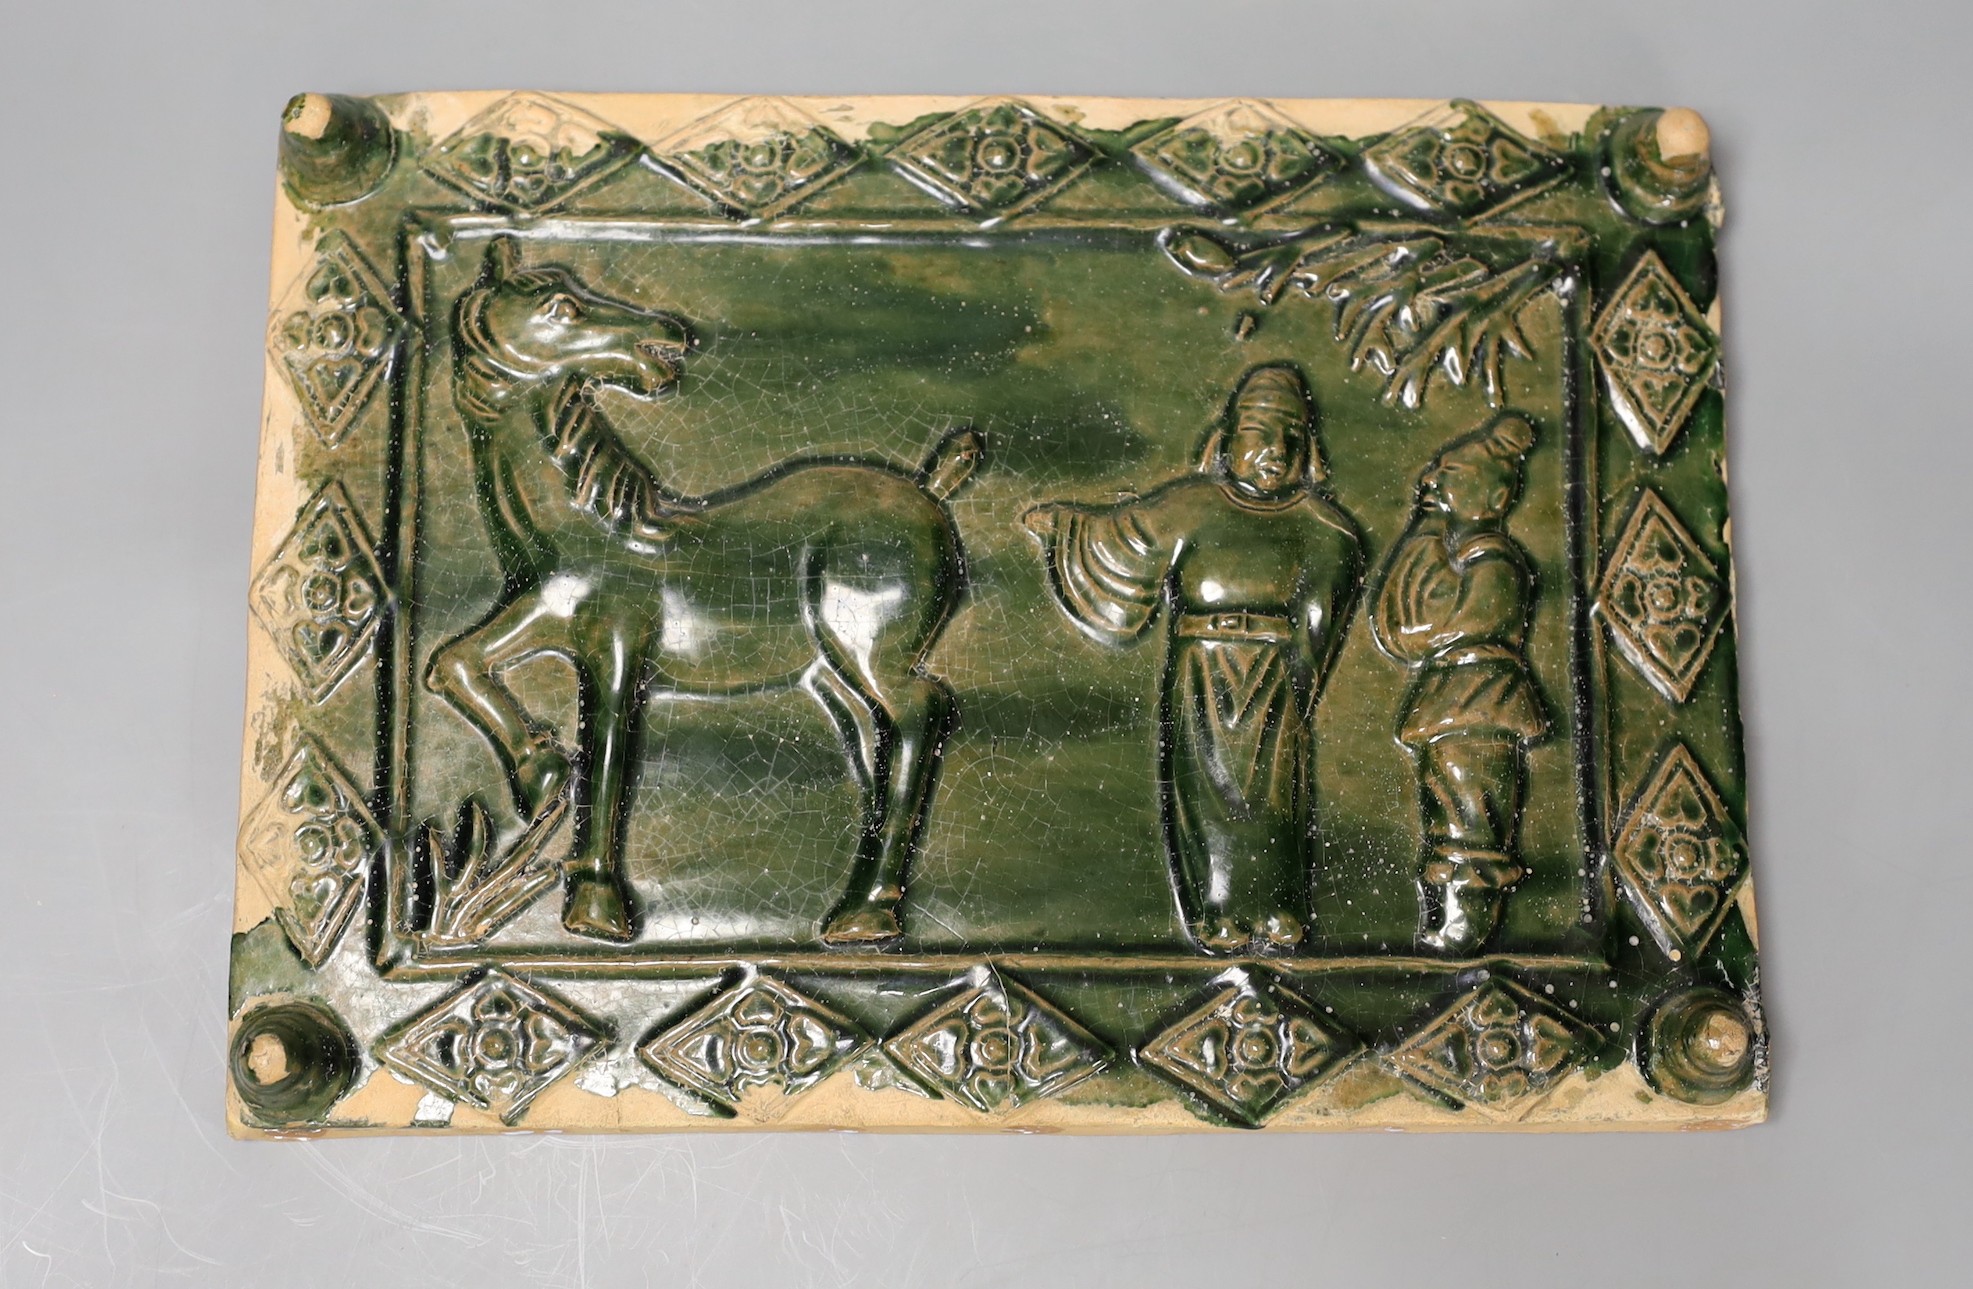 A 19th century Chinese green glazed tile with figures and a horse, 19 x 27cm